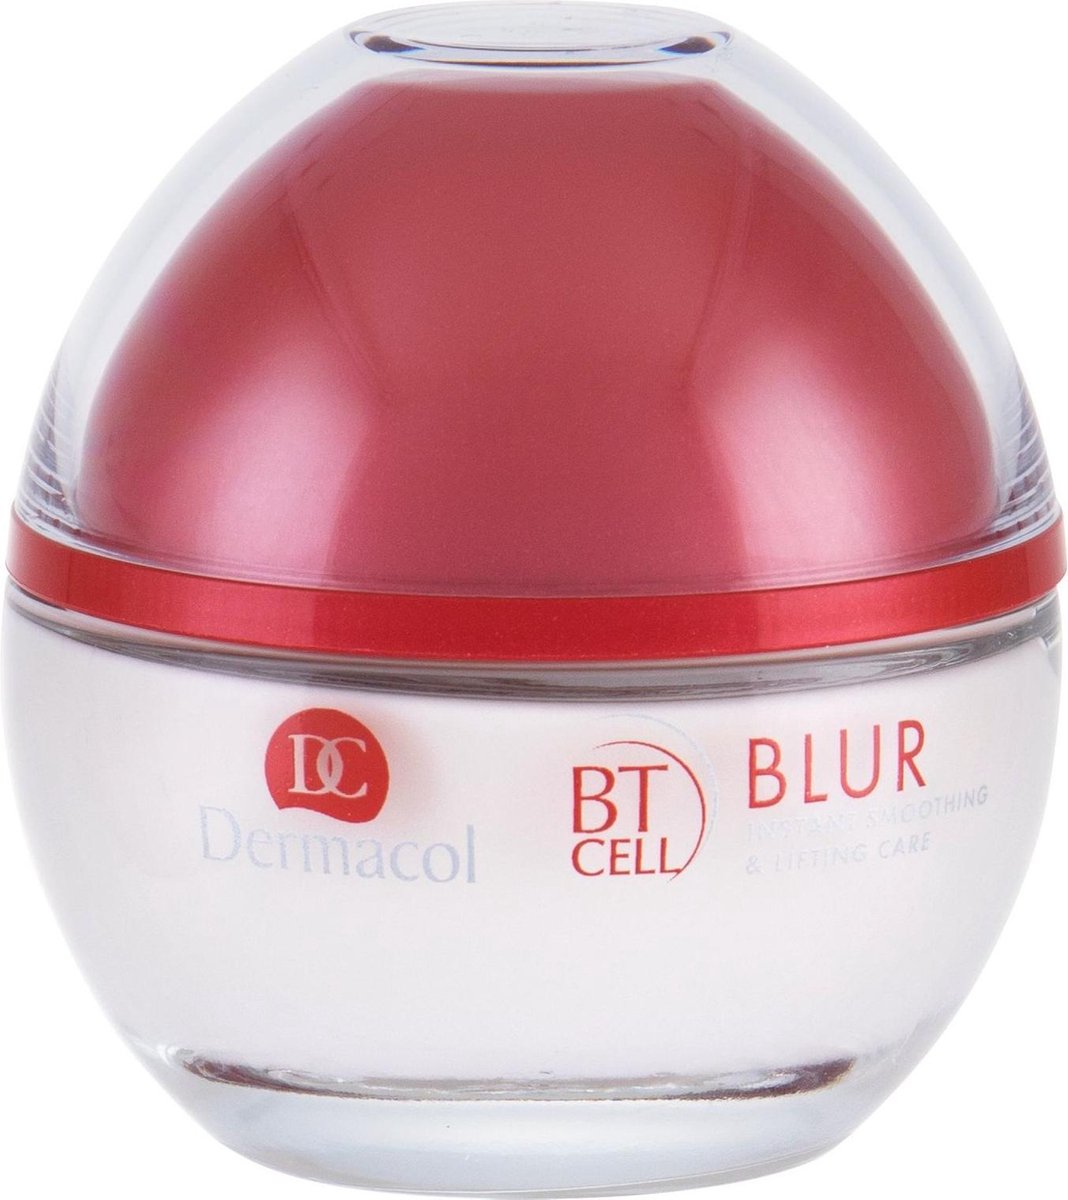 Dermacol - BT Cell Blur Lifting Care - 50ml